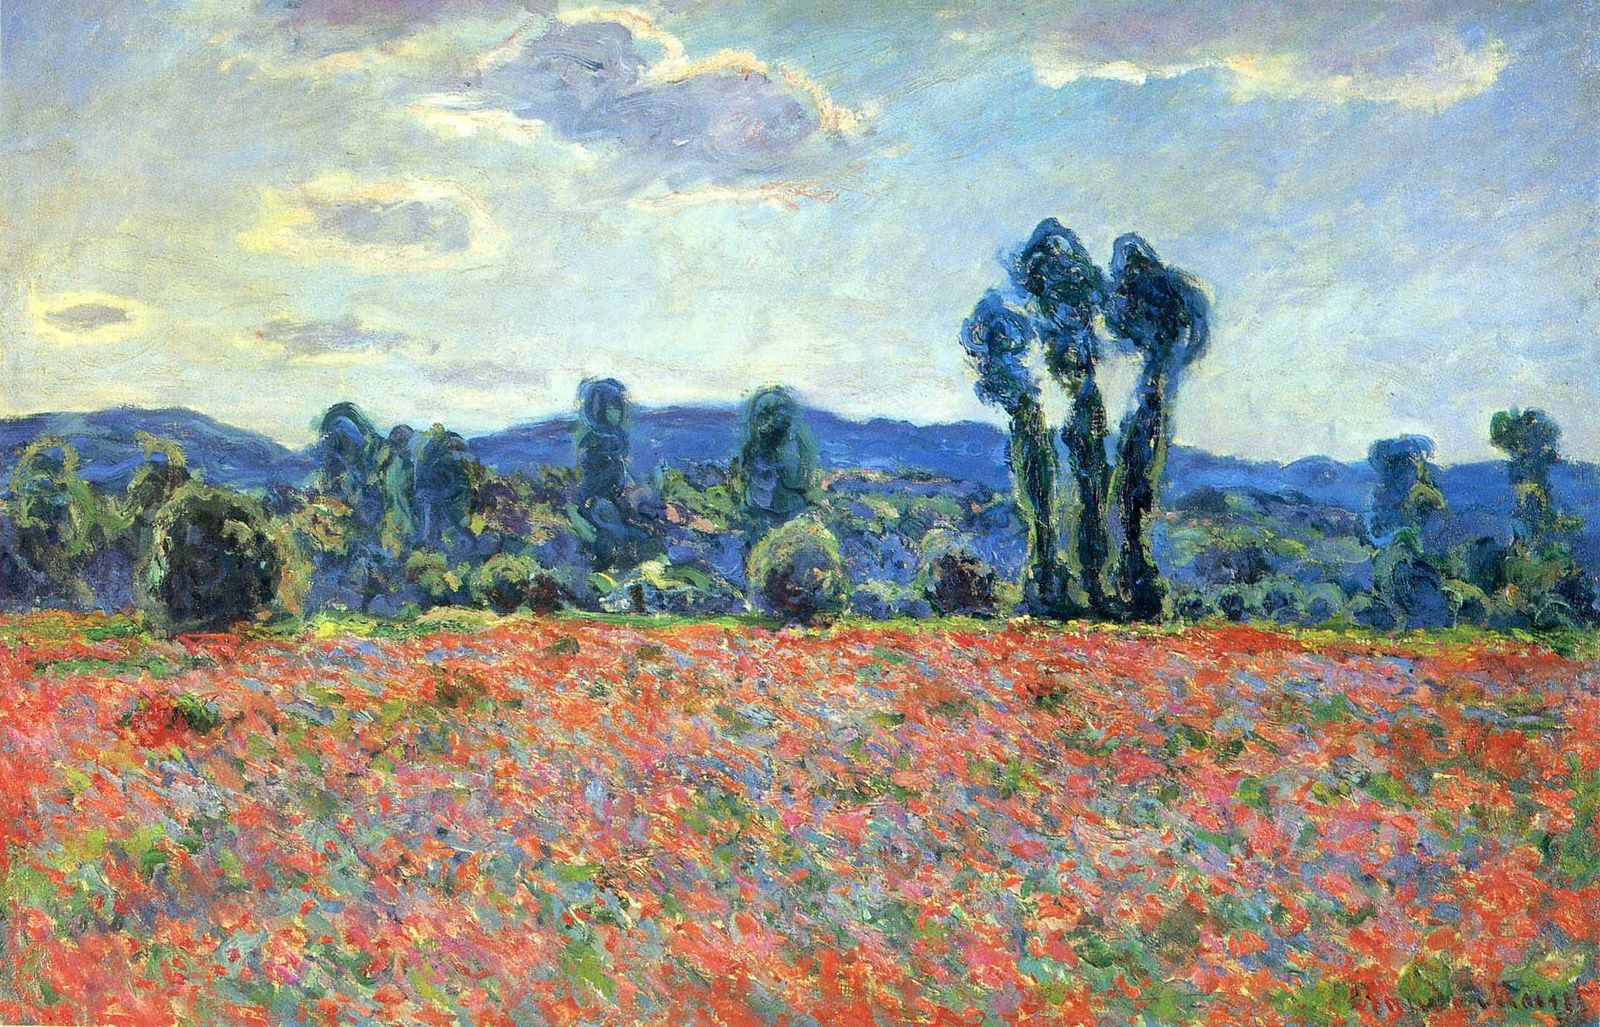 http://impressionism.su/monet/picture/Poppy%20Field%20in%20Giverny.jpg